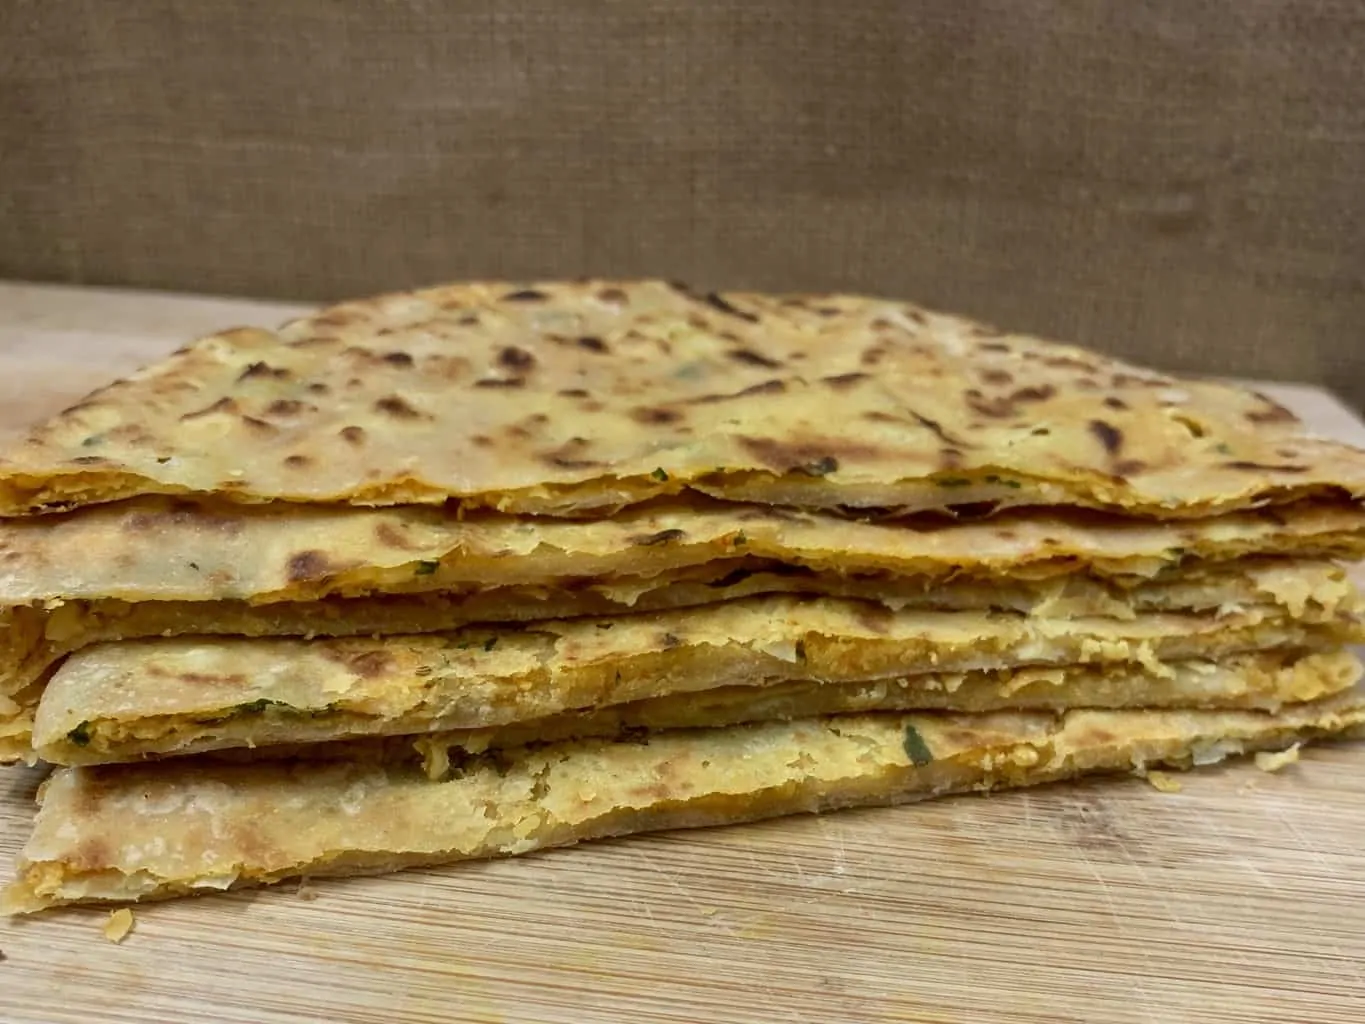 chickpea parathas stacked on one another